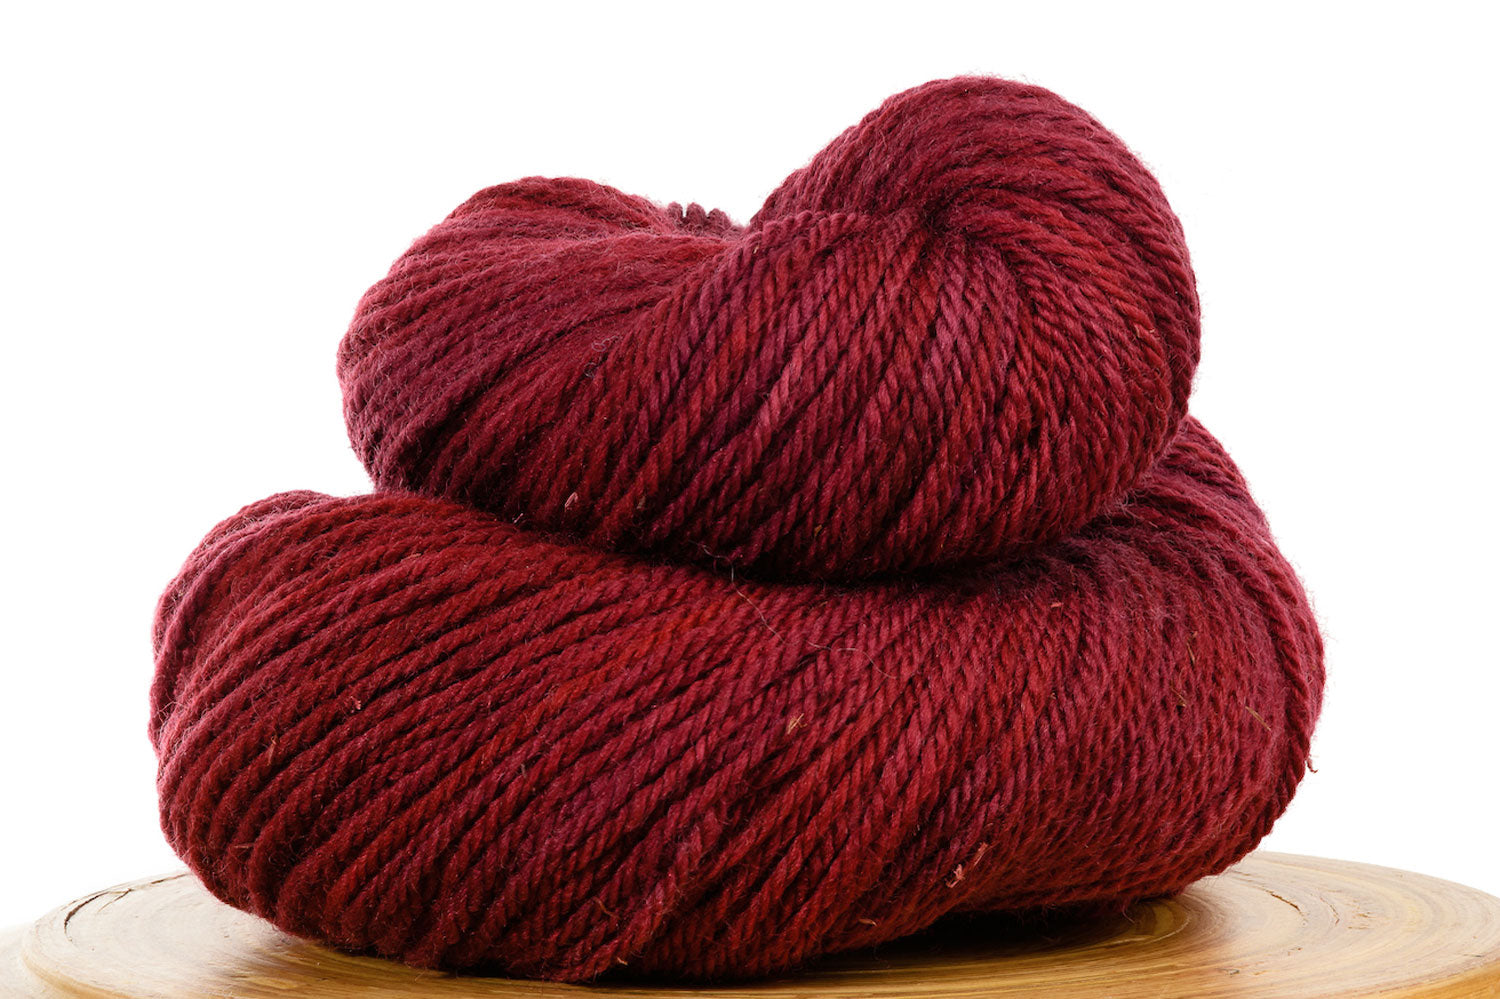 Canasta - burgundy red semi-solid hand-dyed DK weight wool